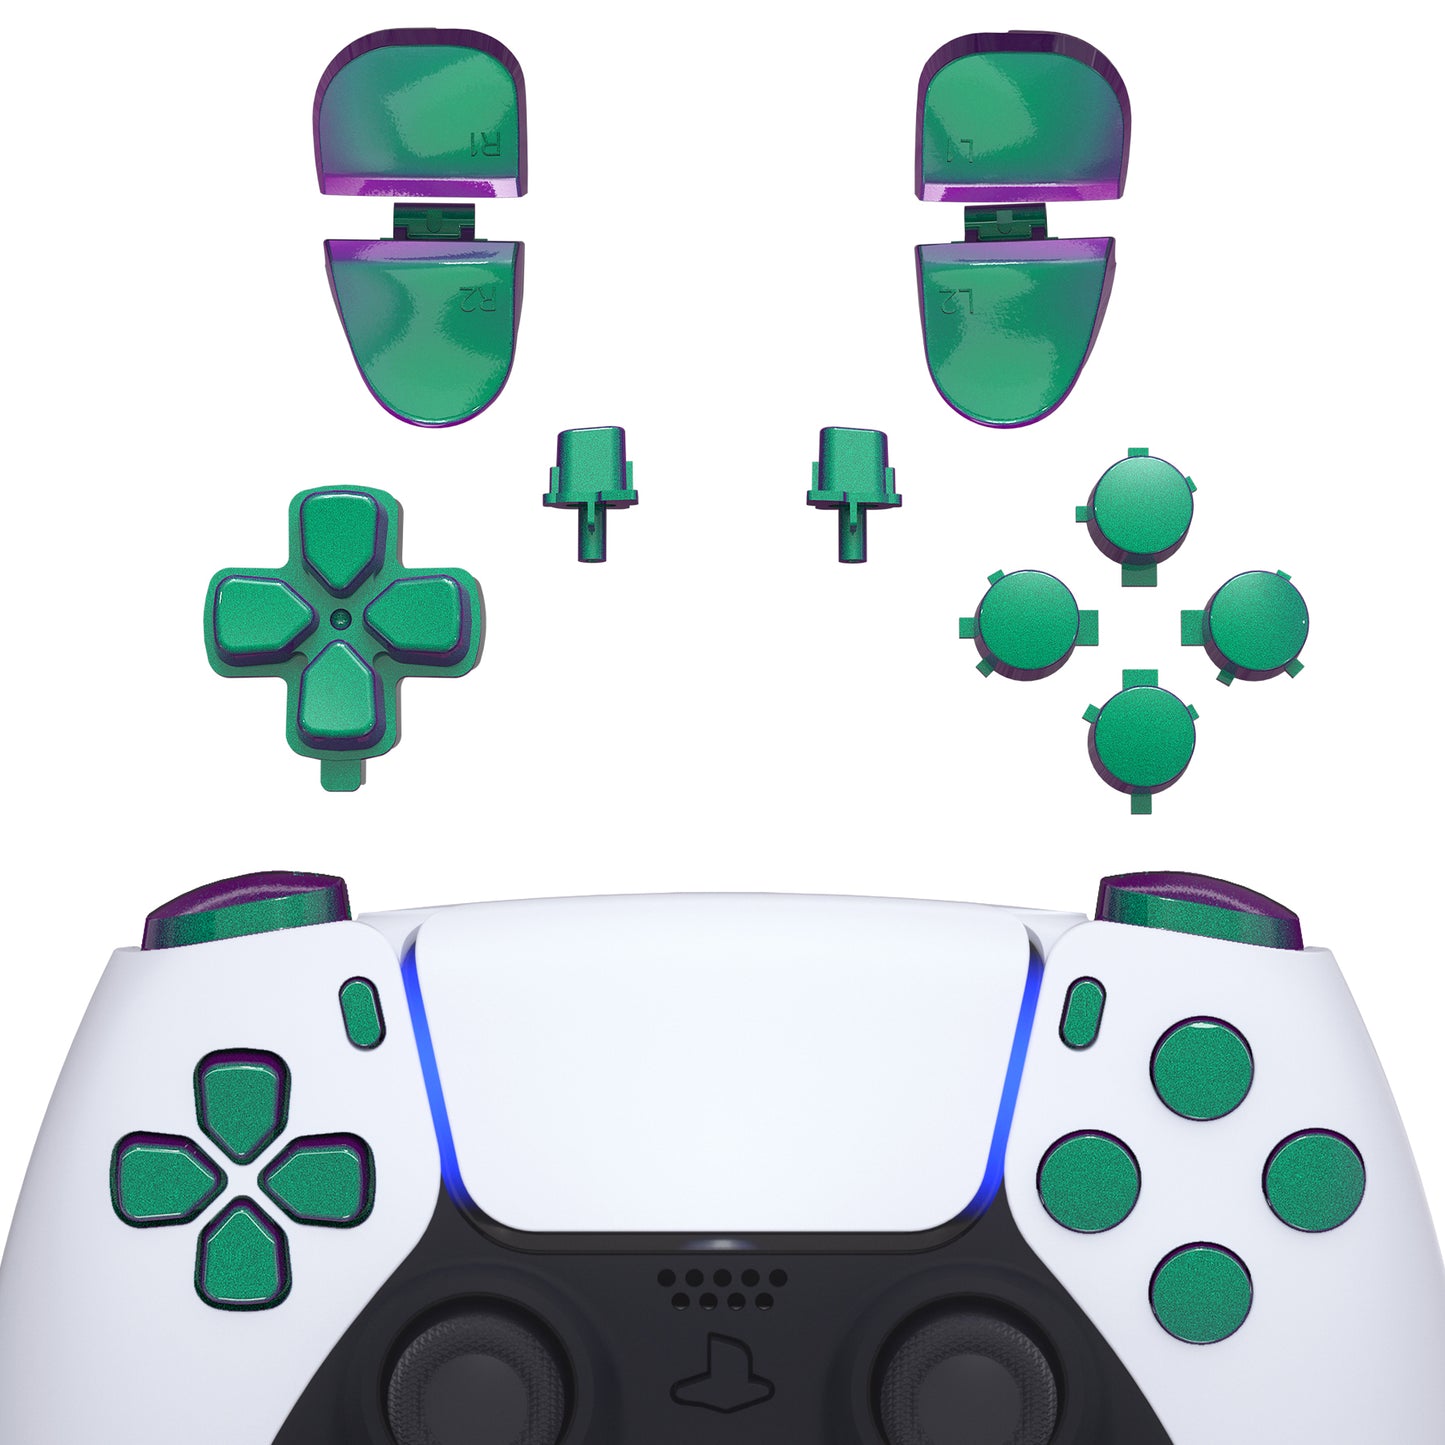 eXtremeRate Retail Replacement D-pad R1 L1 R2 L2 Triggers Share Options Face Buttons, Chameleon Green Purple Full Set Buttons Compatible with ps5 Controller BDM-030 - JPF1002G3